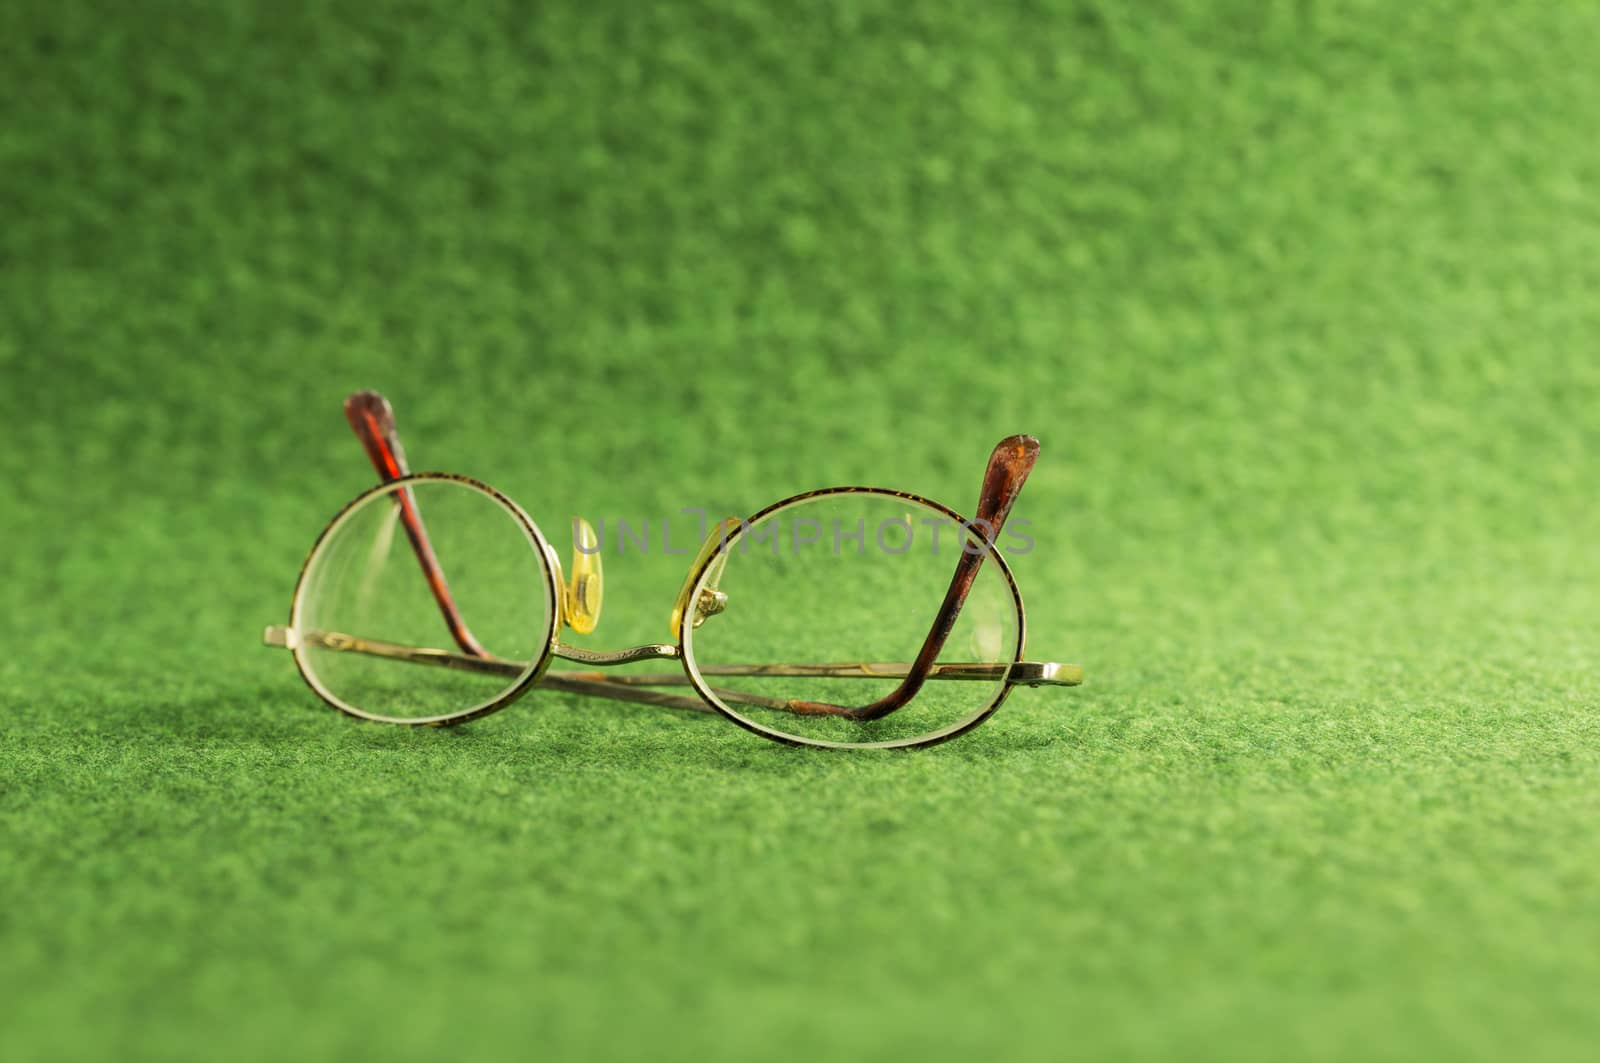 green olg glasses by compuinfoto